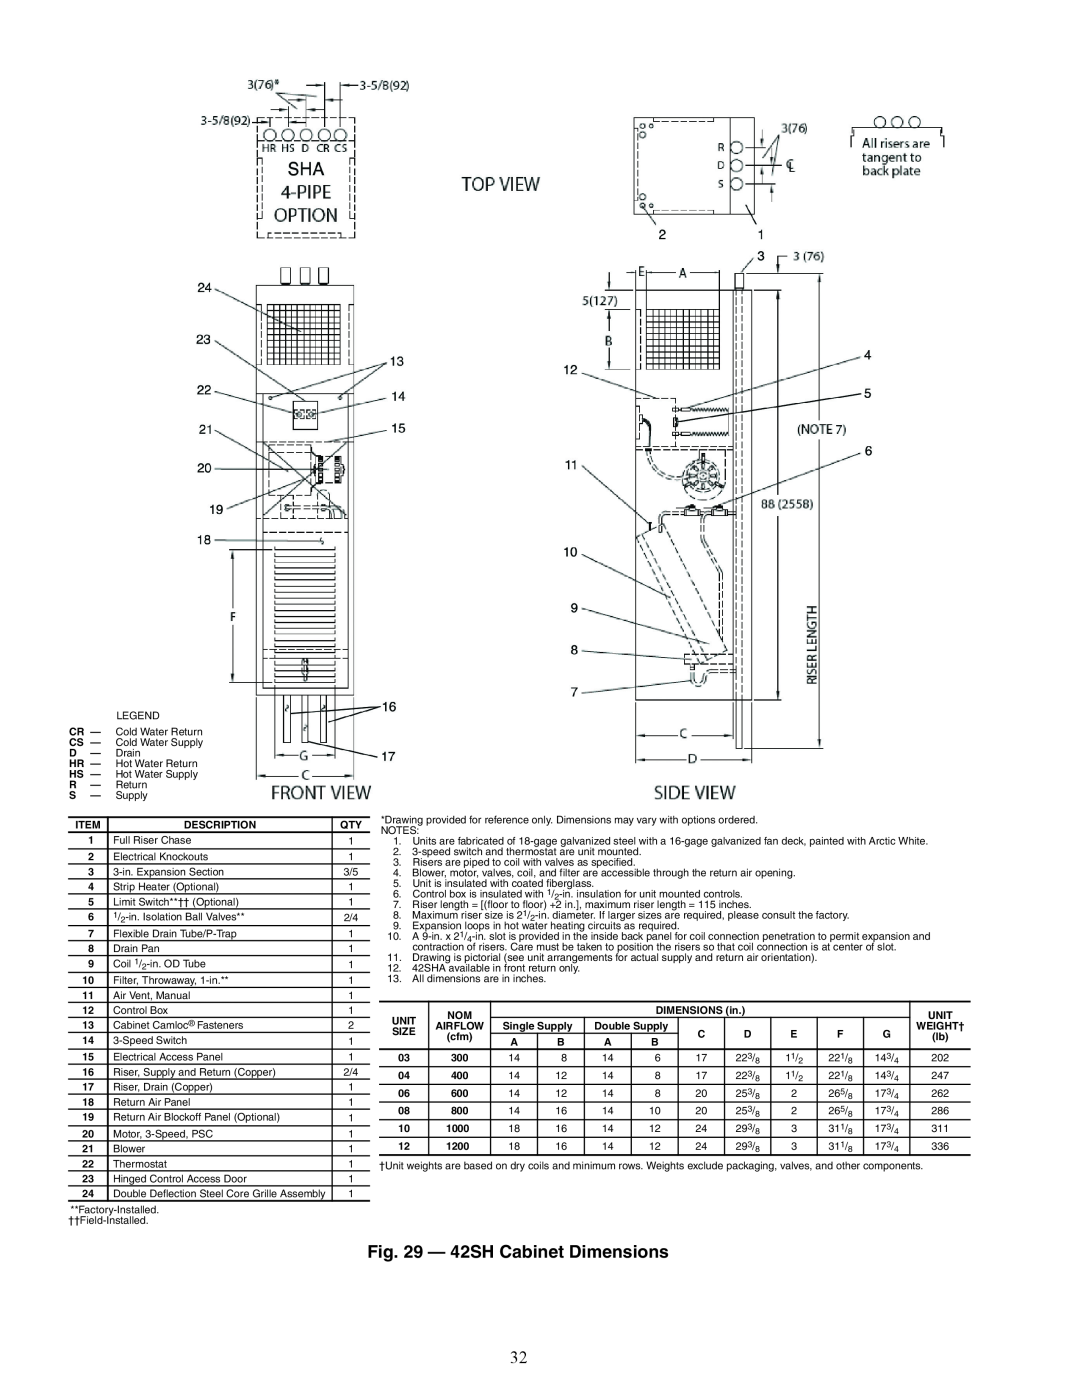 Carrier 42C, 42D, 42V specifications A42-4126, 42SH Cabinet Dimensions 